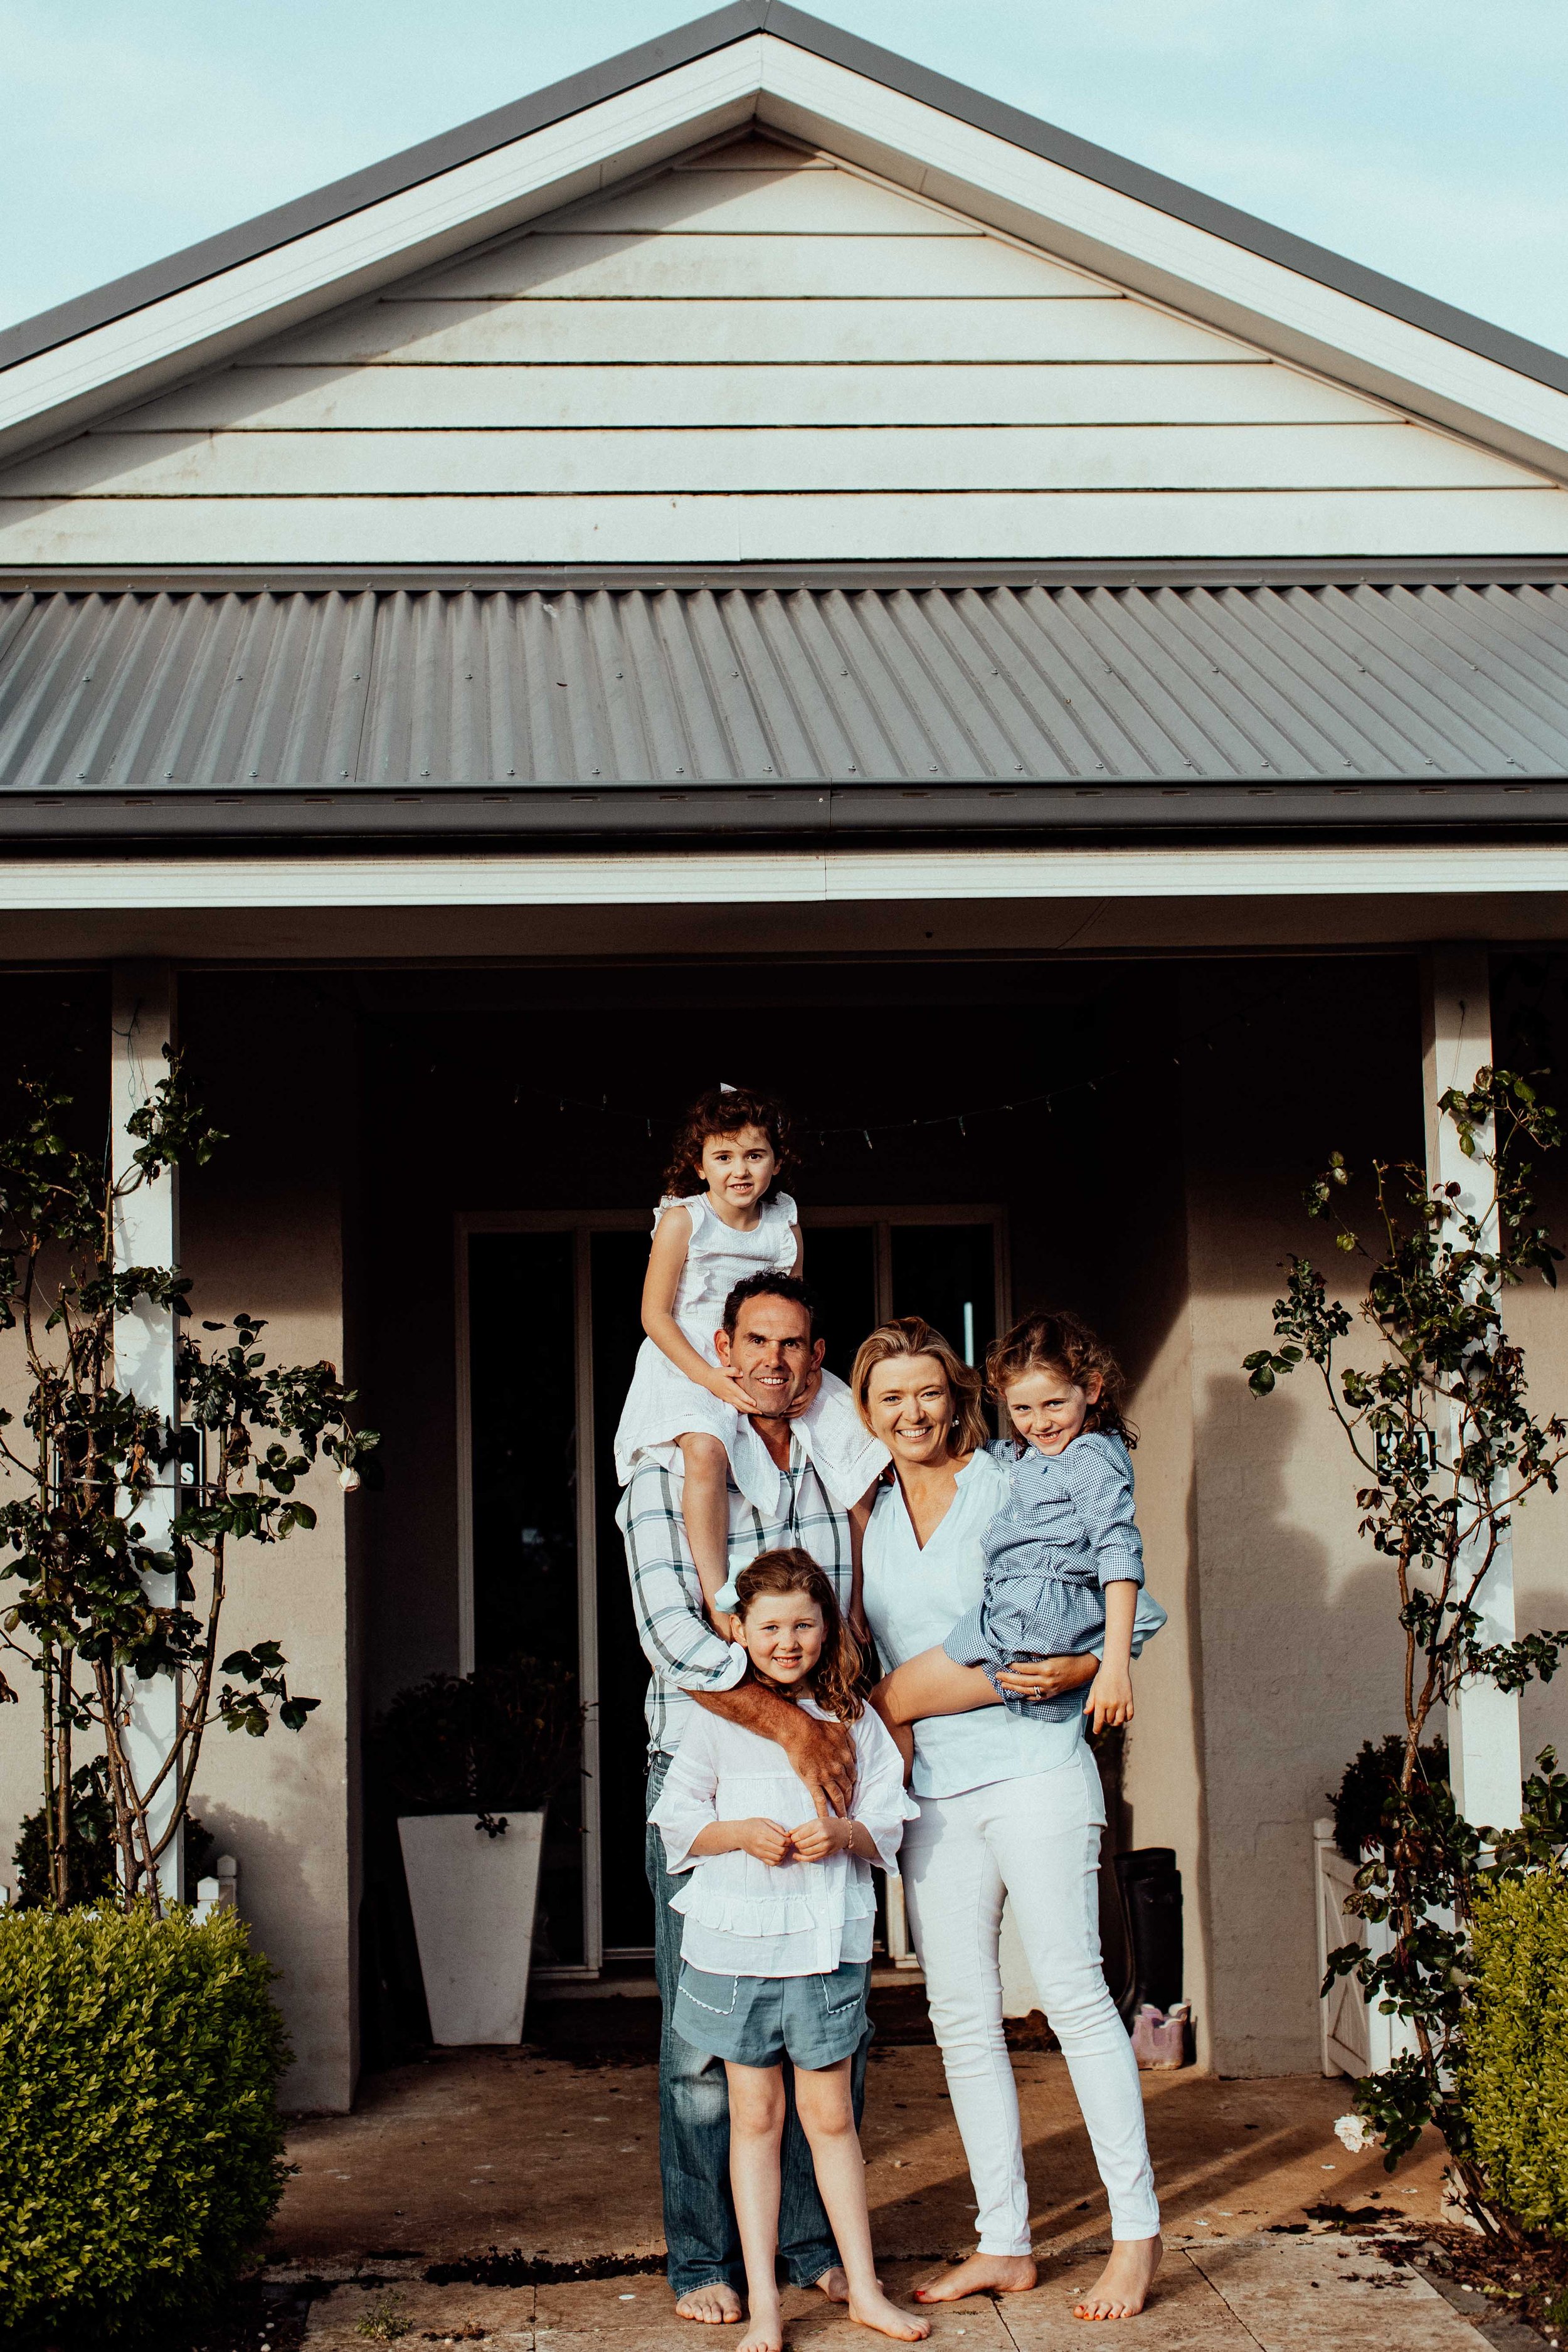 carroll-family-exeter-southern-hoghlands-inhome-family-lifestyle-wollondilly-camden-macarthur-sydney-photography-www.emilyobrienphotography.net-77.jpg